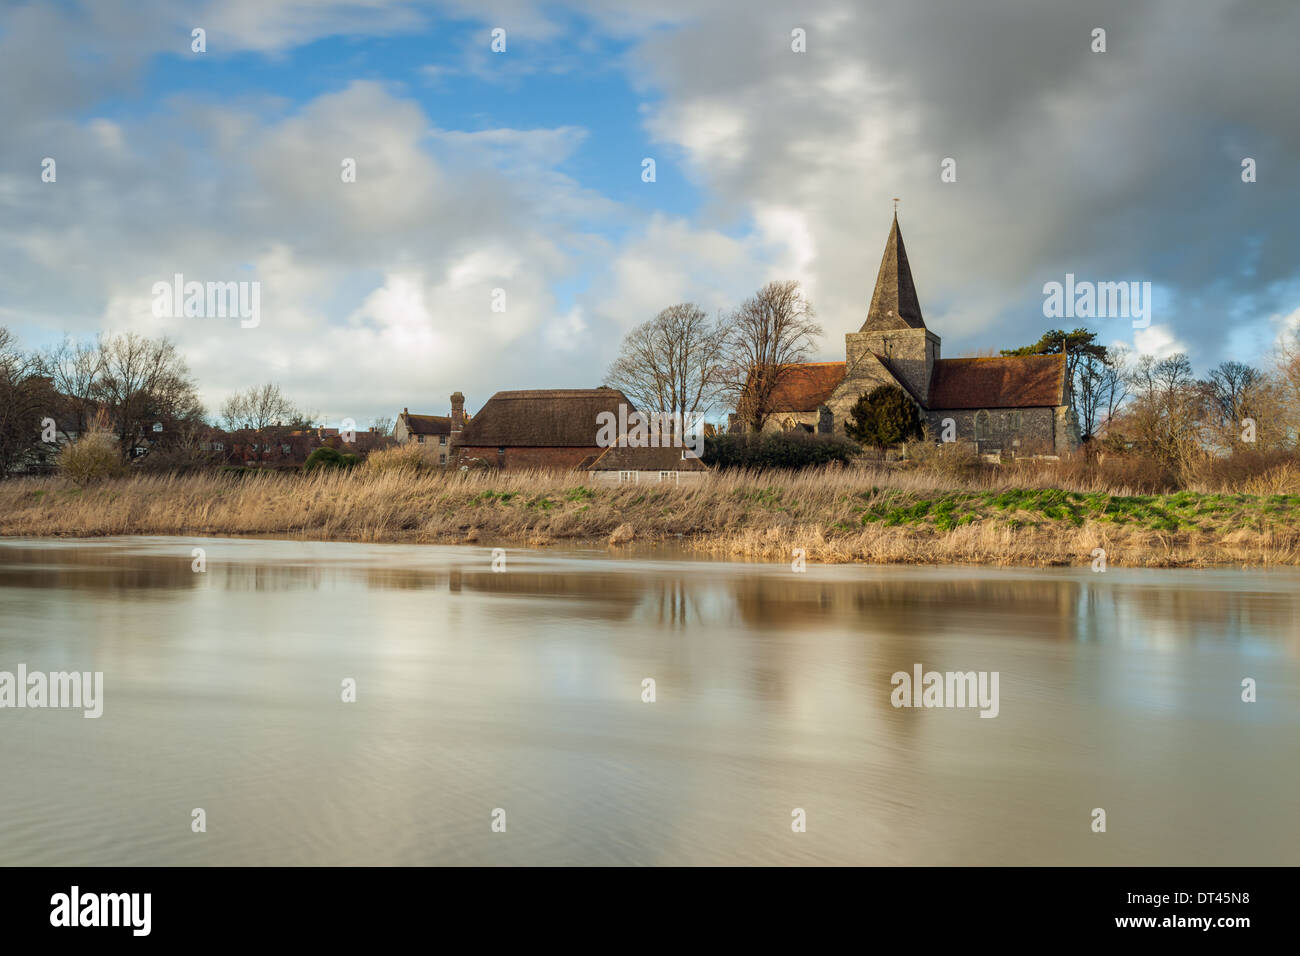 St Andrew's Church ('Cathedral of the Downs') in flooded Alfriston, a picturesque medieval village in East Sussex, England. Stock Photo